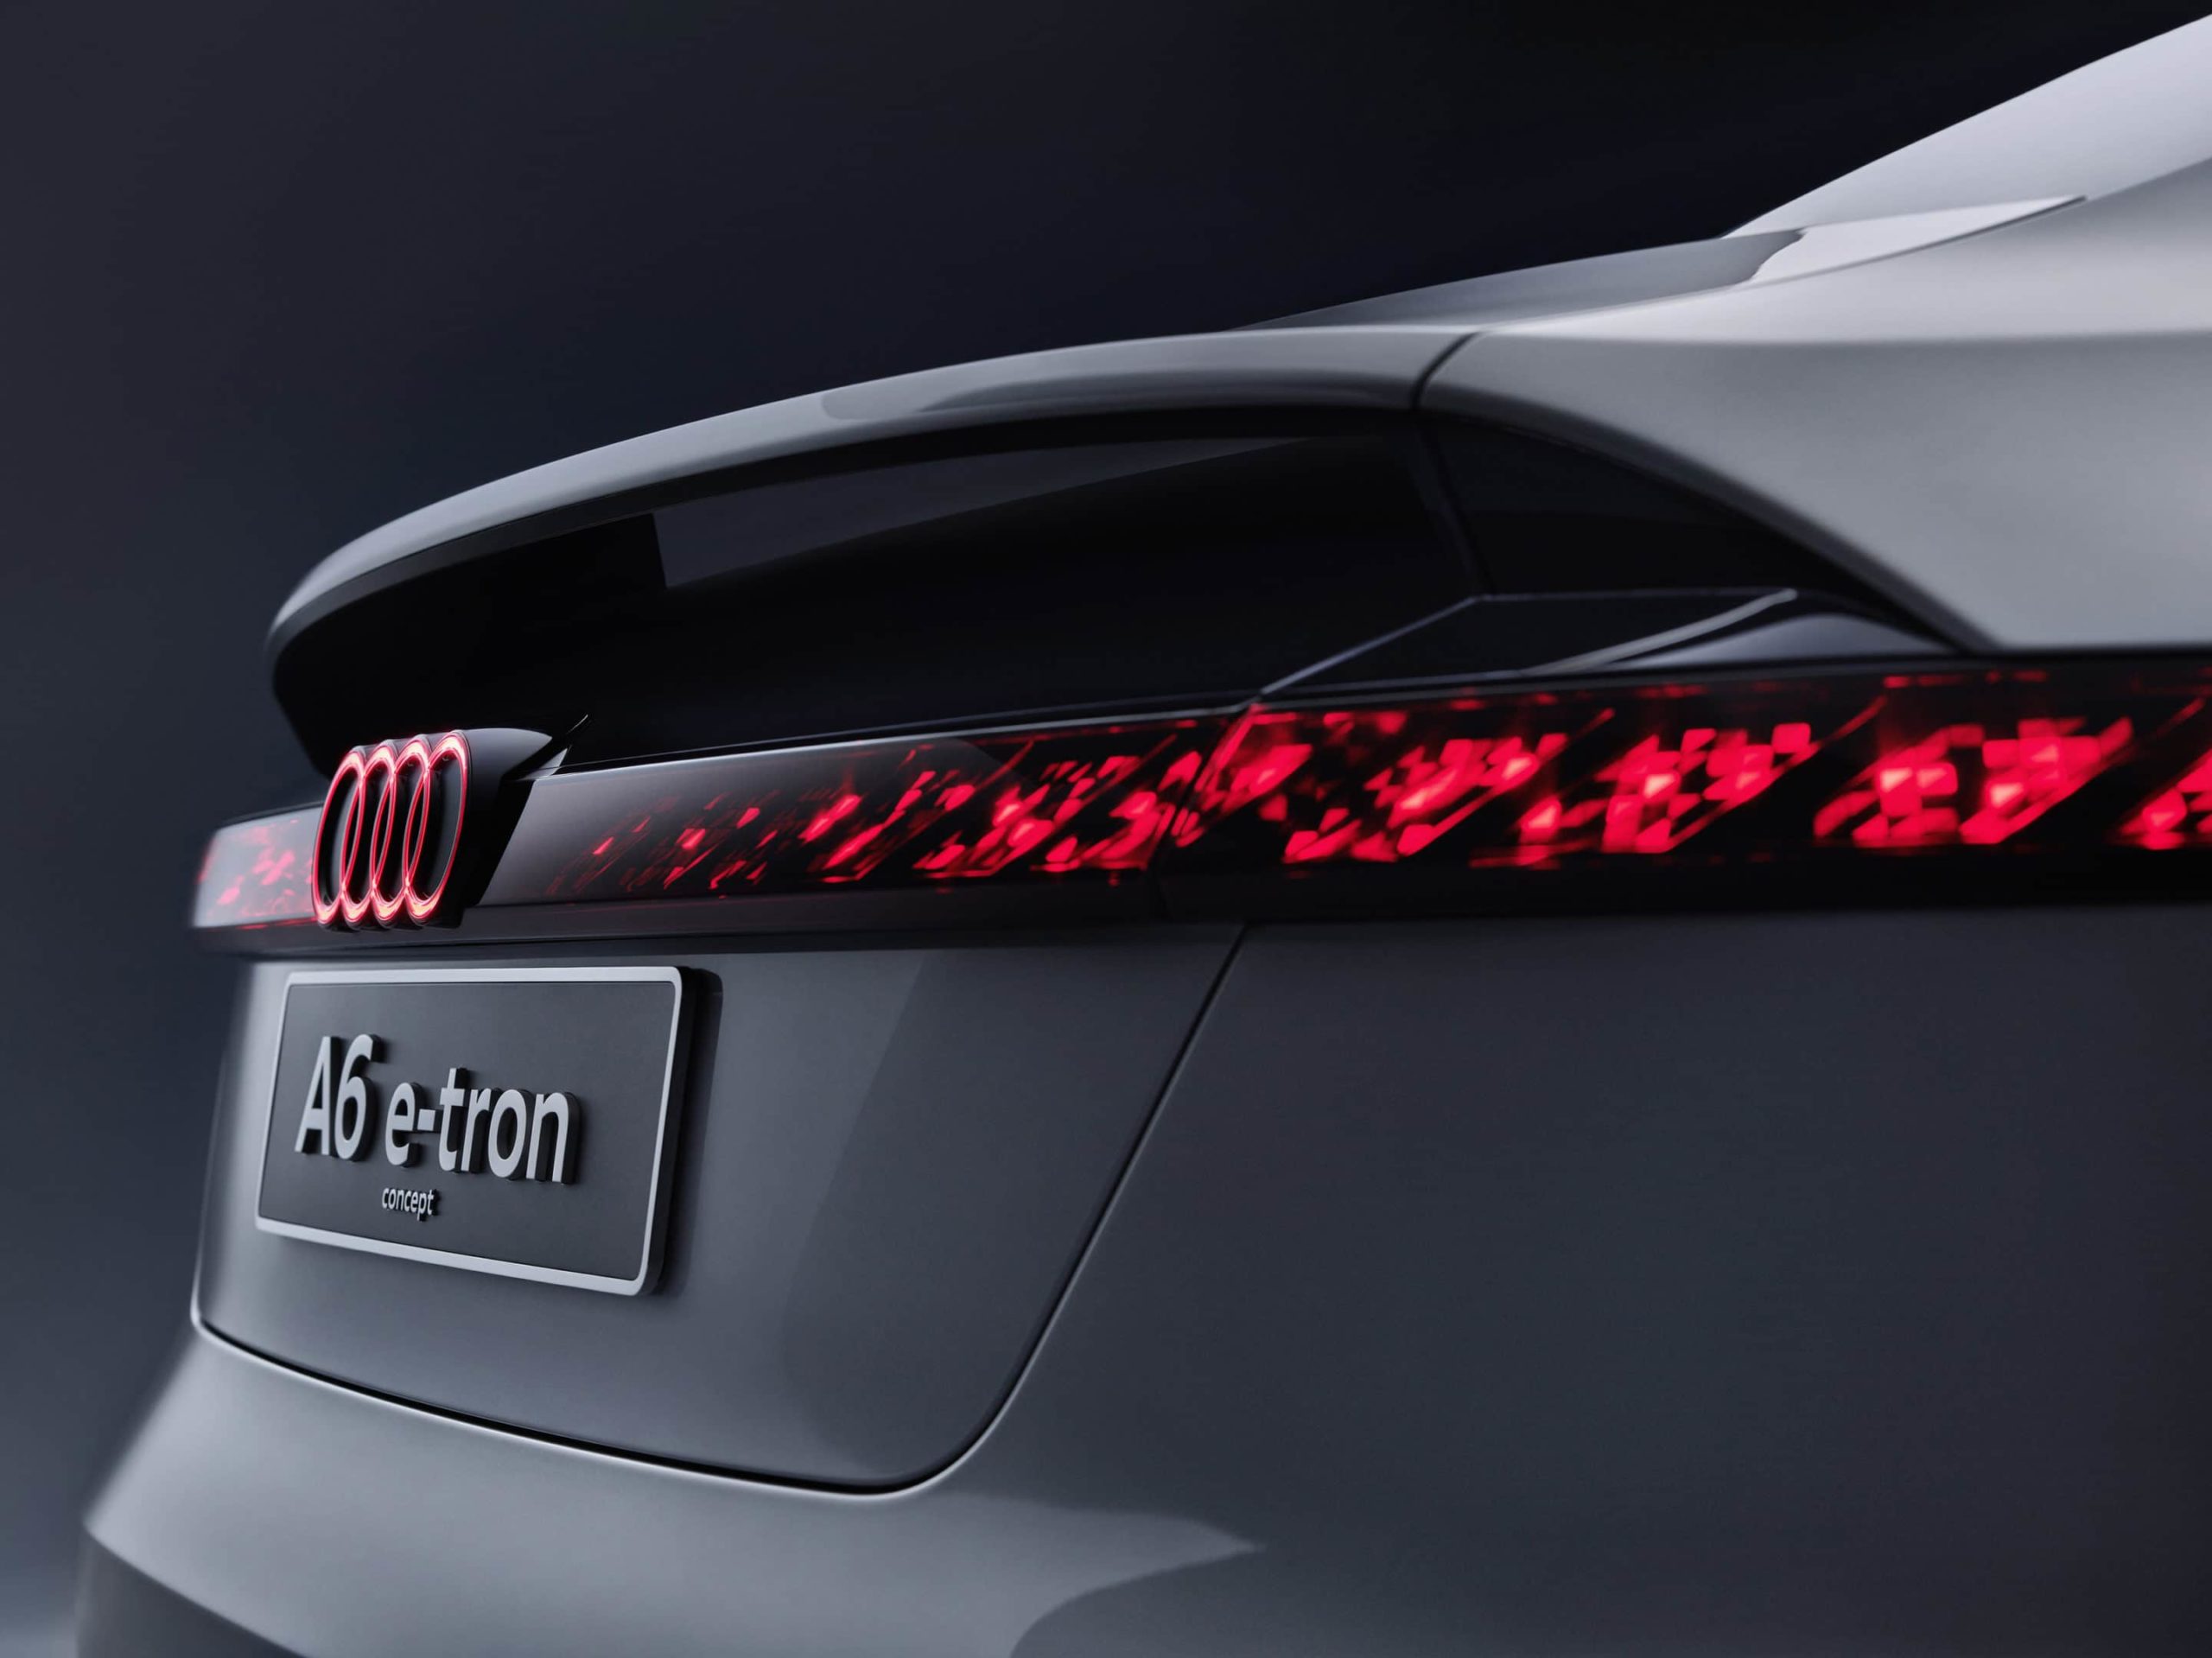 OLED Rear Lighting Comes Standard in Audi's New A8 Design